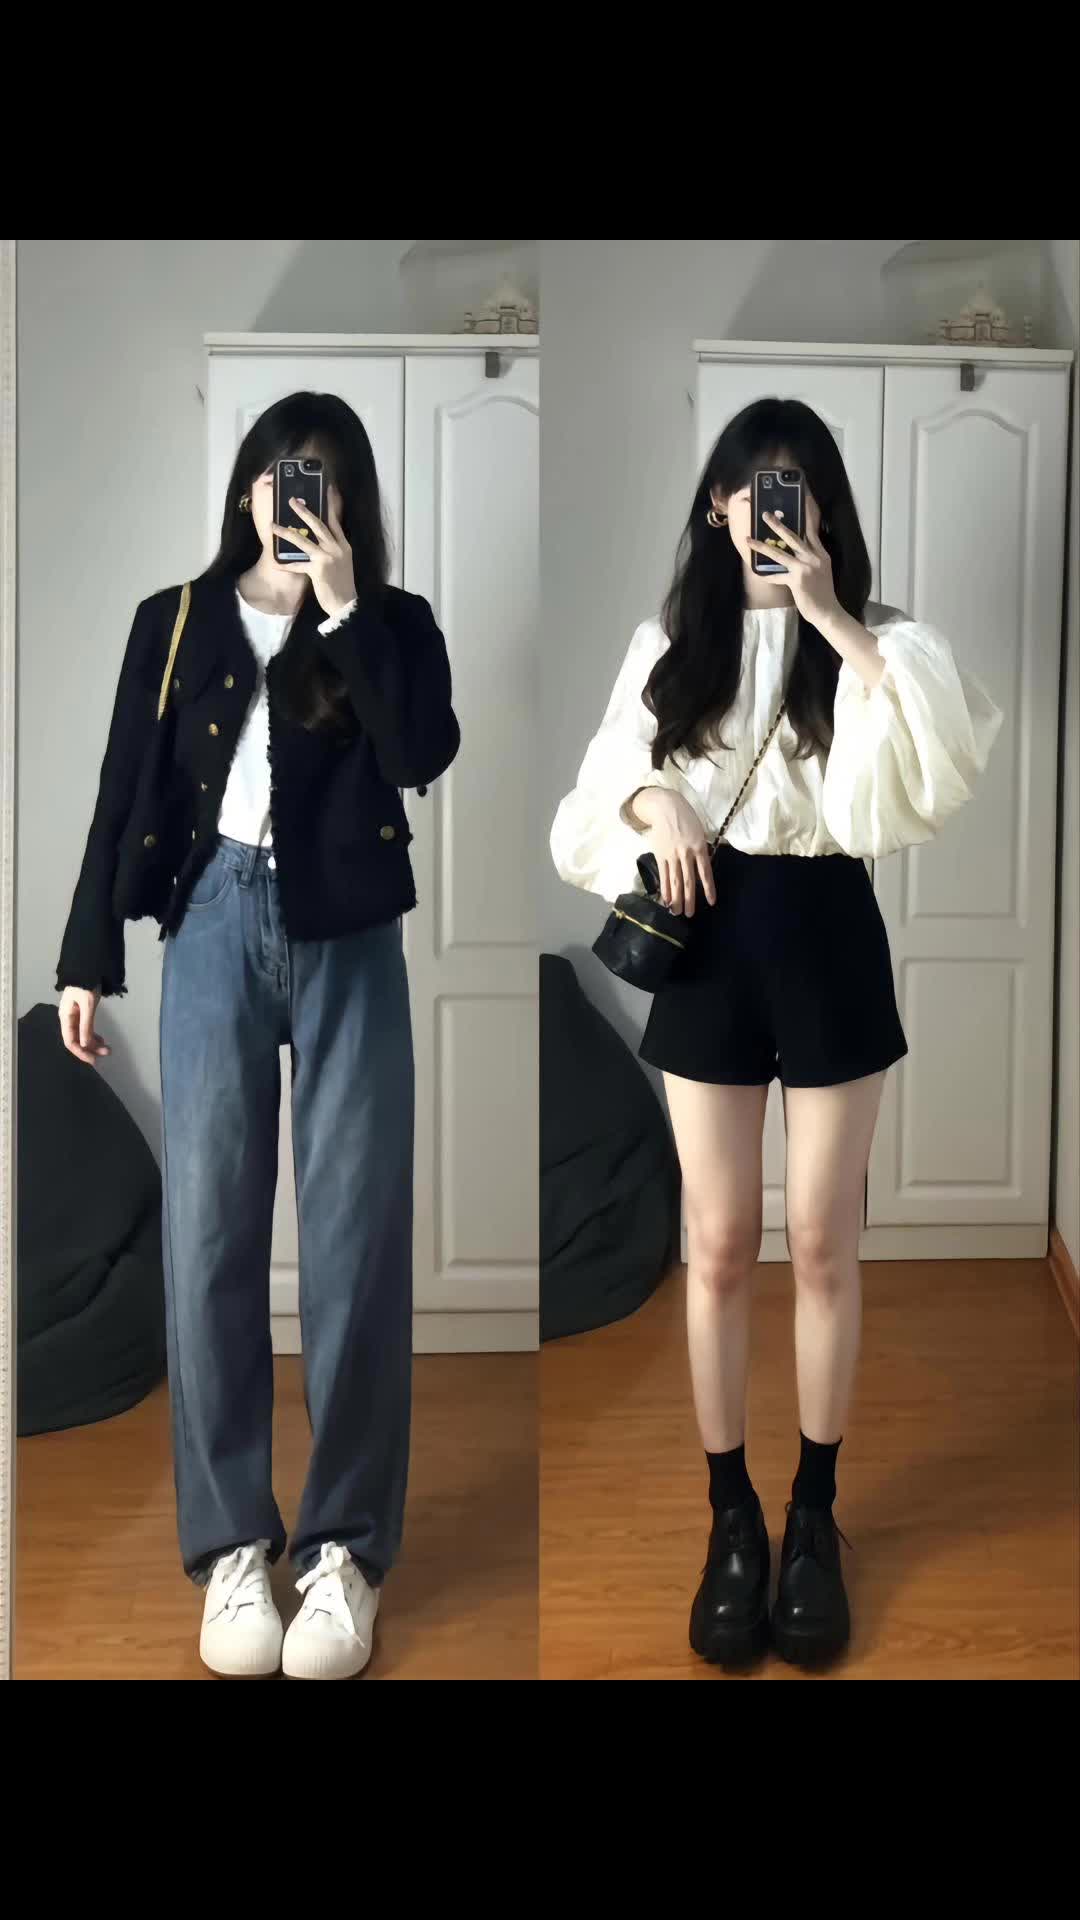 @?#fyp #outfit #phoidoxinh #xuhuongtiktok #trending #goviral ...